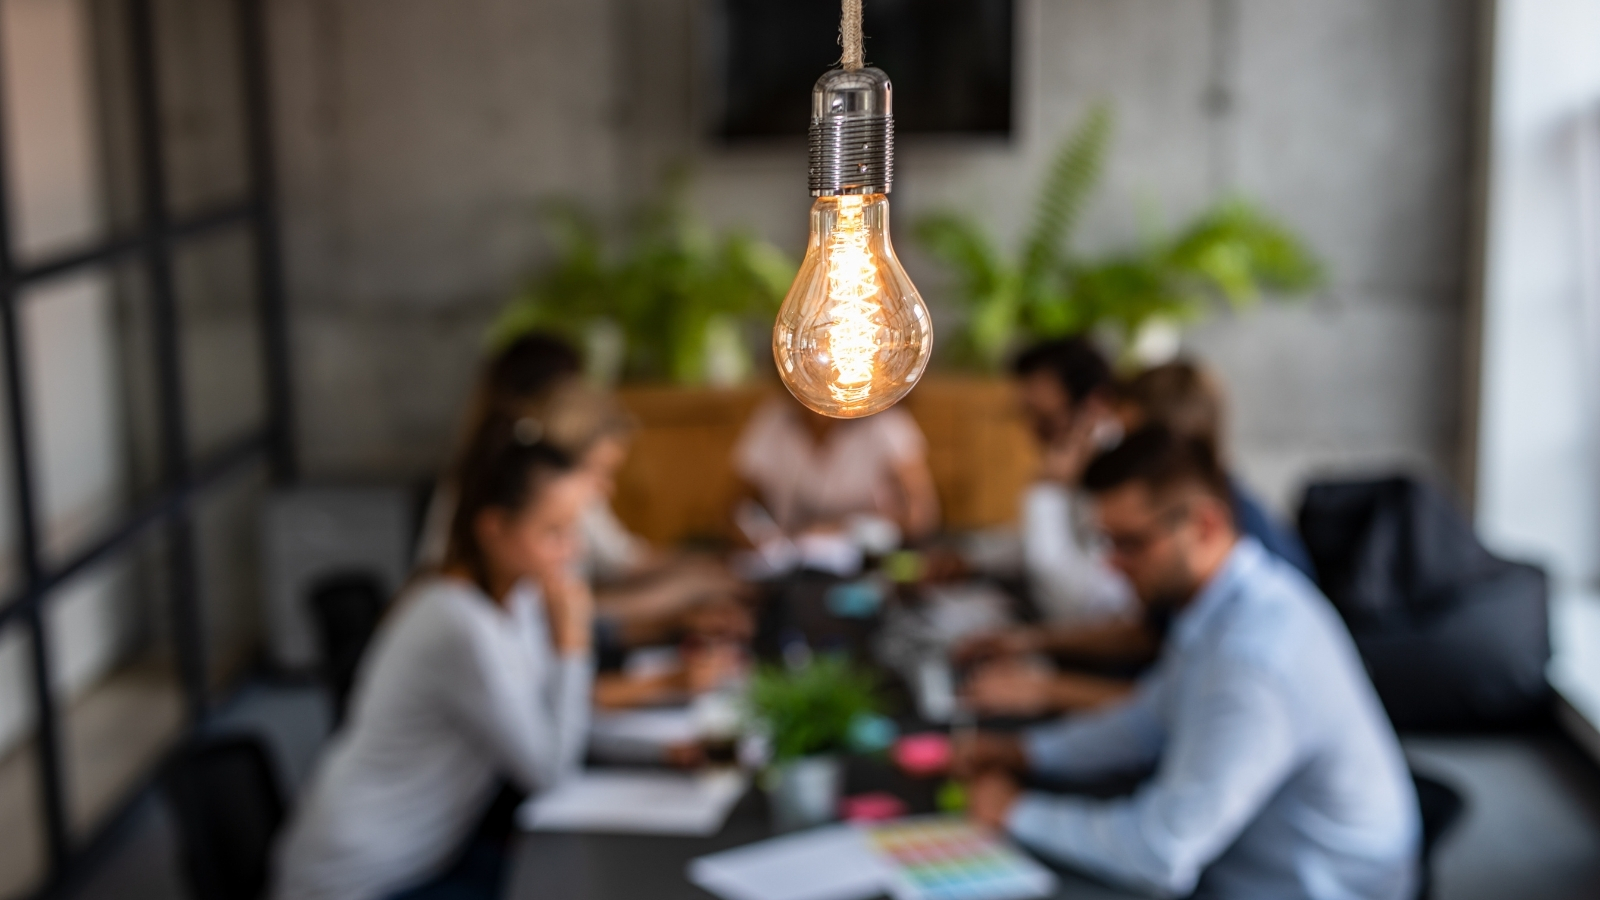 A group of creative producers collaborate at an office desk, they are slightly blurred out of the image, with a big lightbulb in focus hanging above them